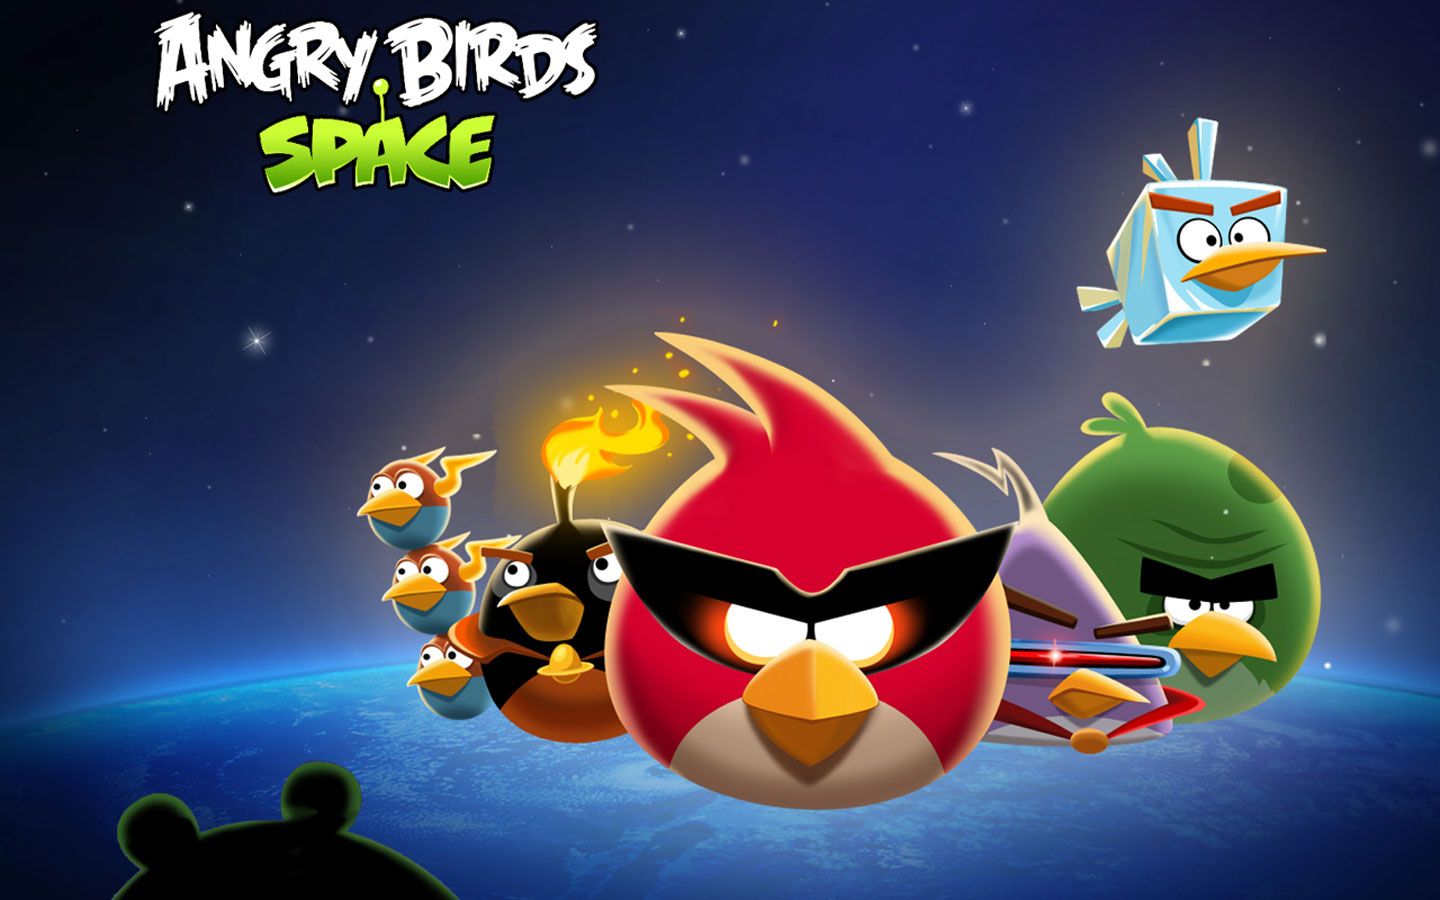 Angry Birds Space Wallpaper - Angry Birds Wallpaper (32221385 ...